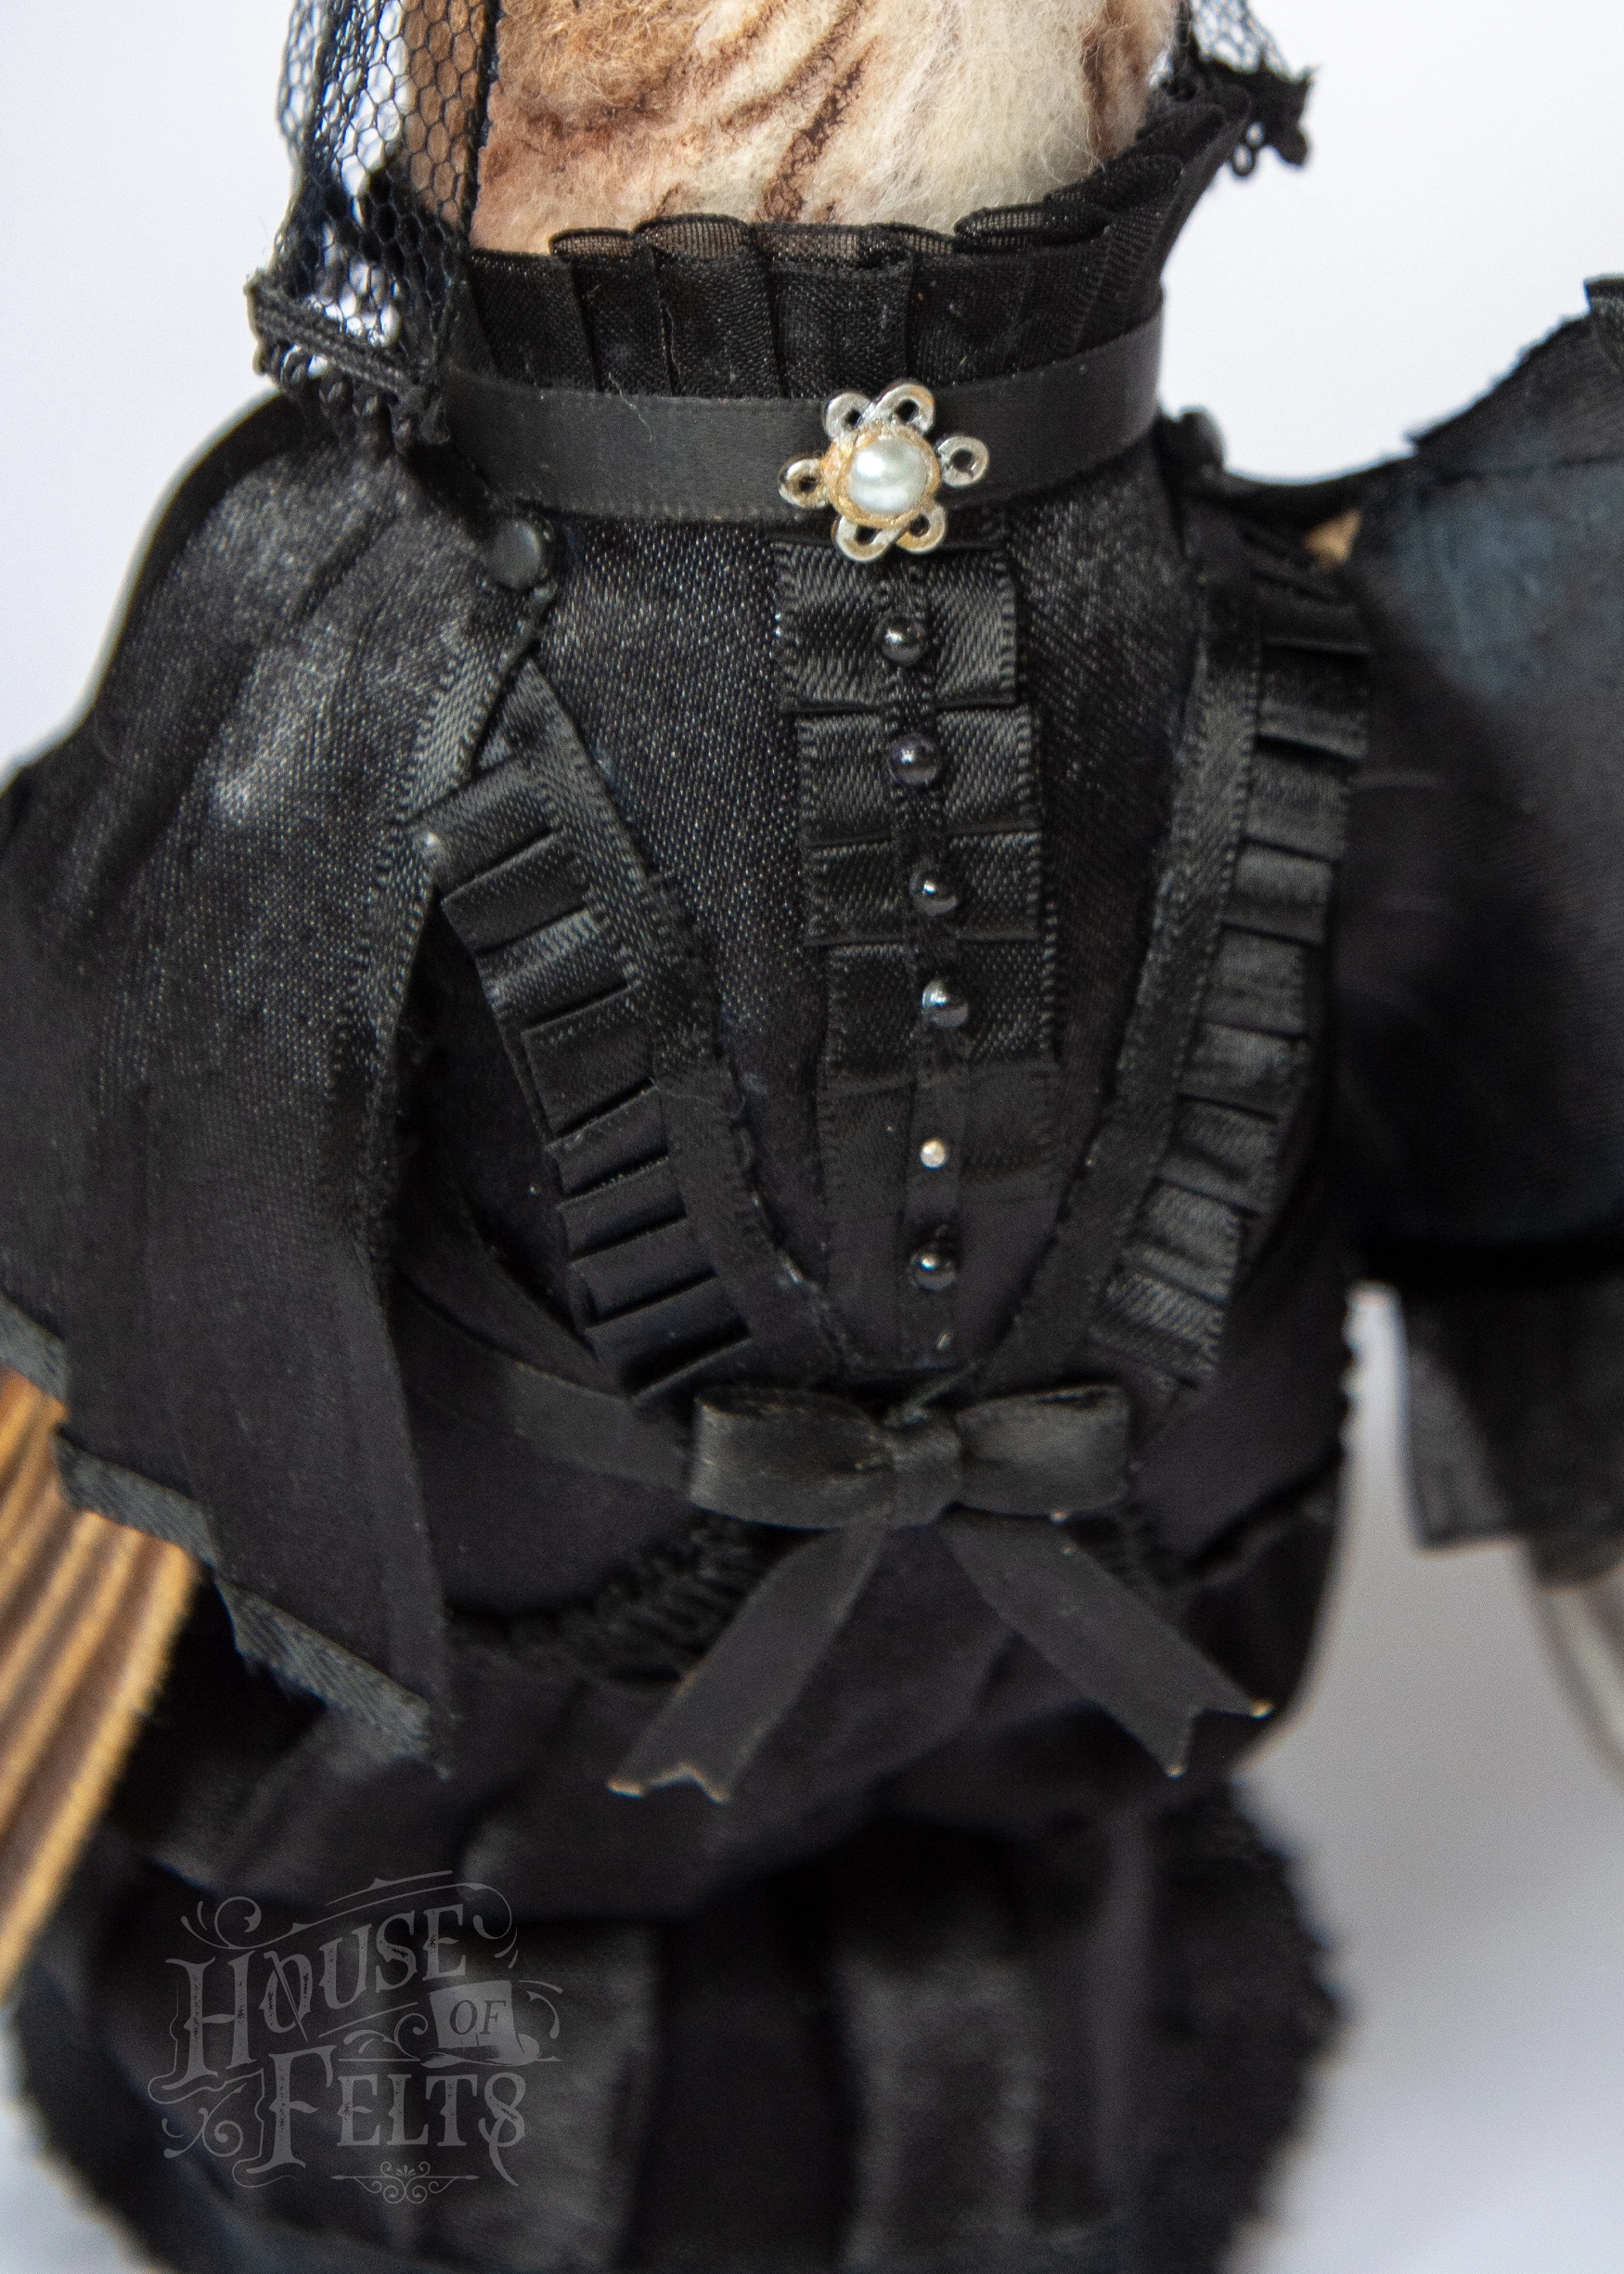 Details of miniature victorian mourning clothing for needle felted anthropomorphic bird